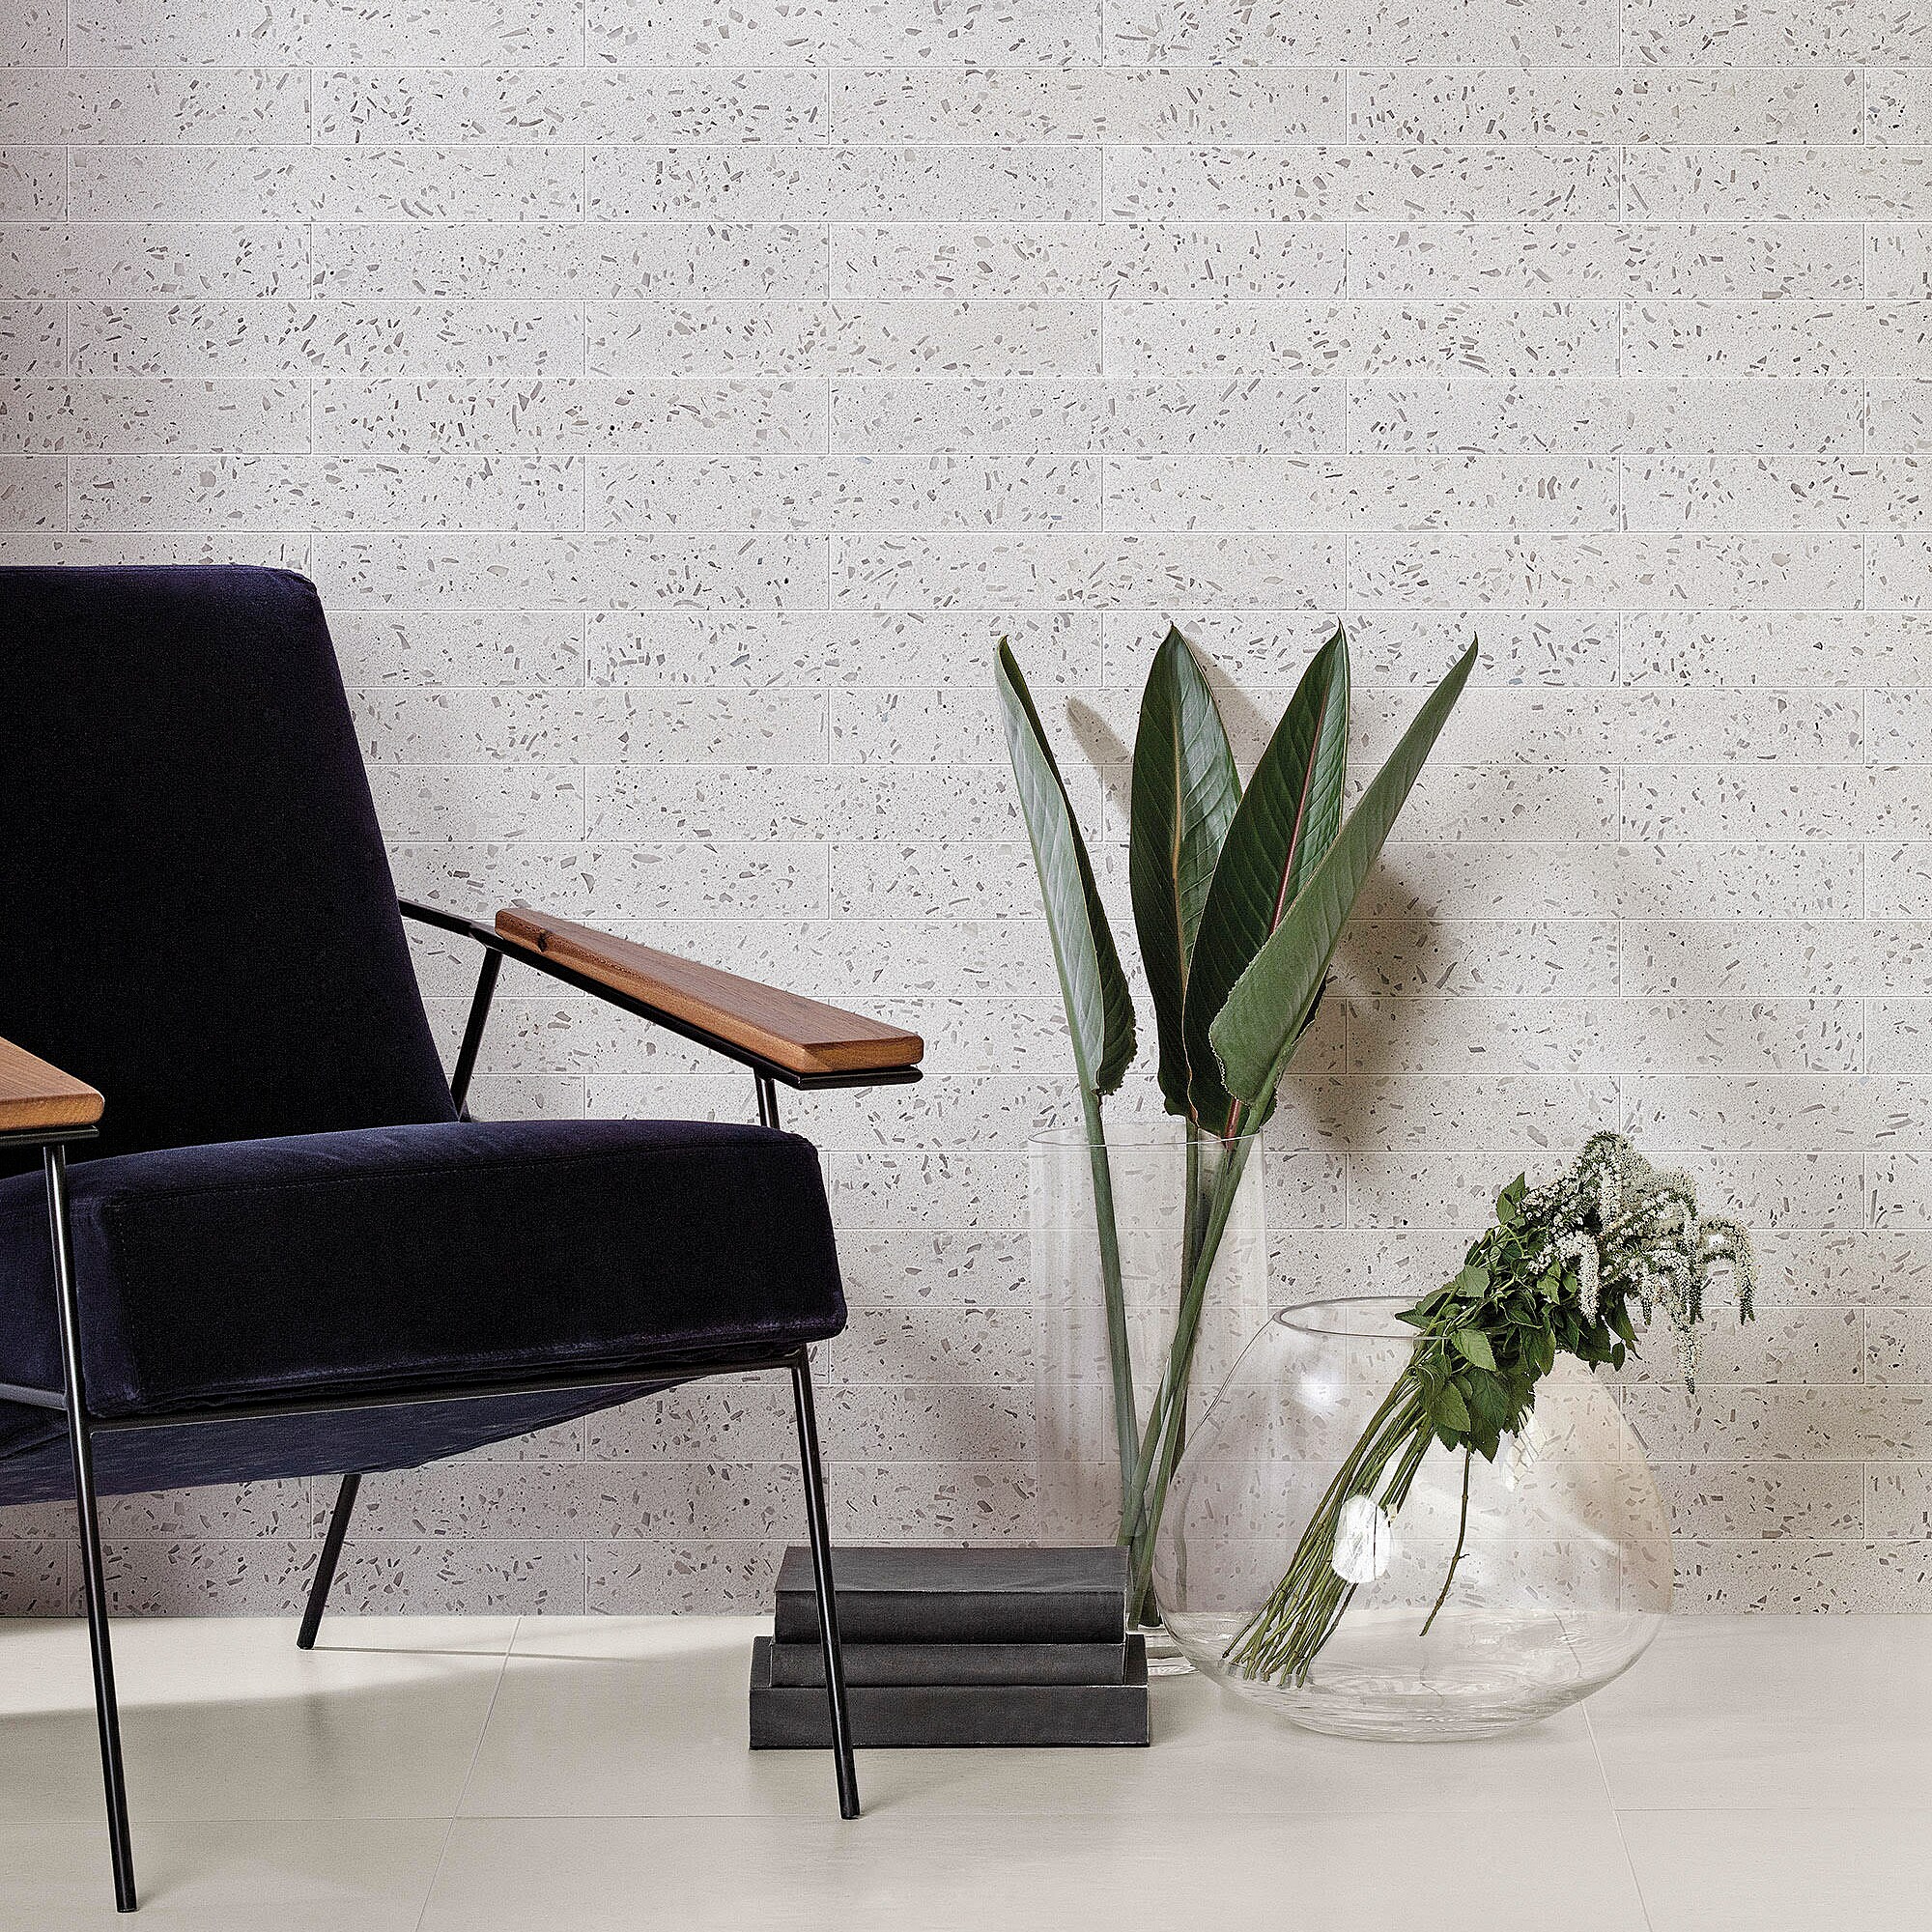 Brick the 3-in Artmore Gray Look Lunar Wall department at Natural Slate Tile Stone ft/ Terrazzo 16-in Matte in Carton) Tile Tile Stone (5.38-sq. x